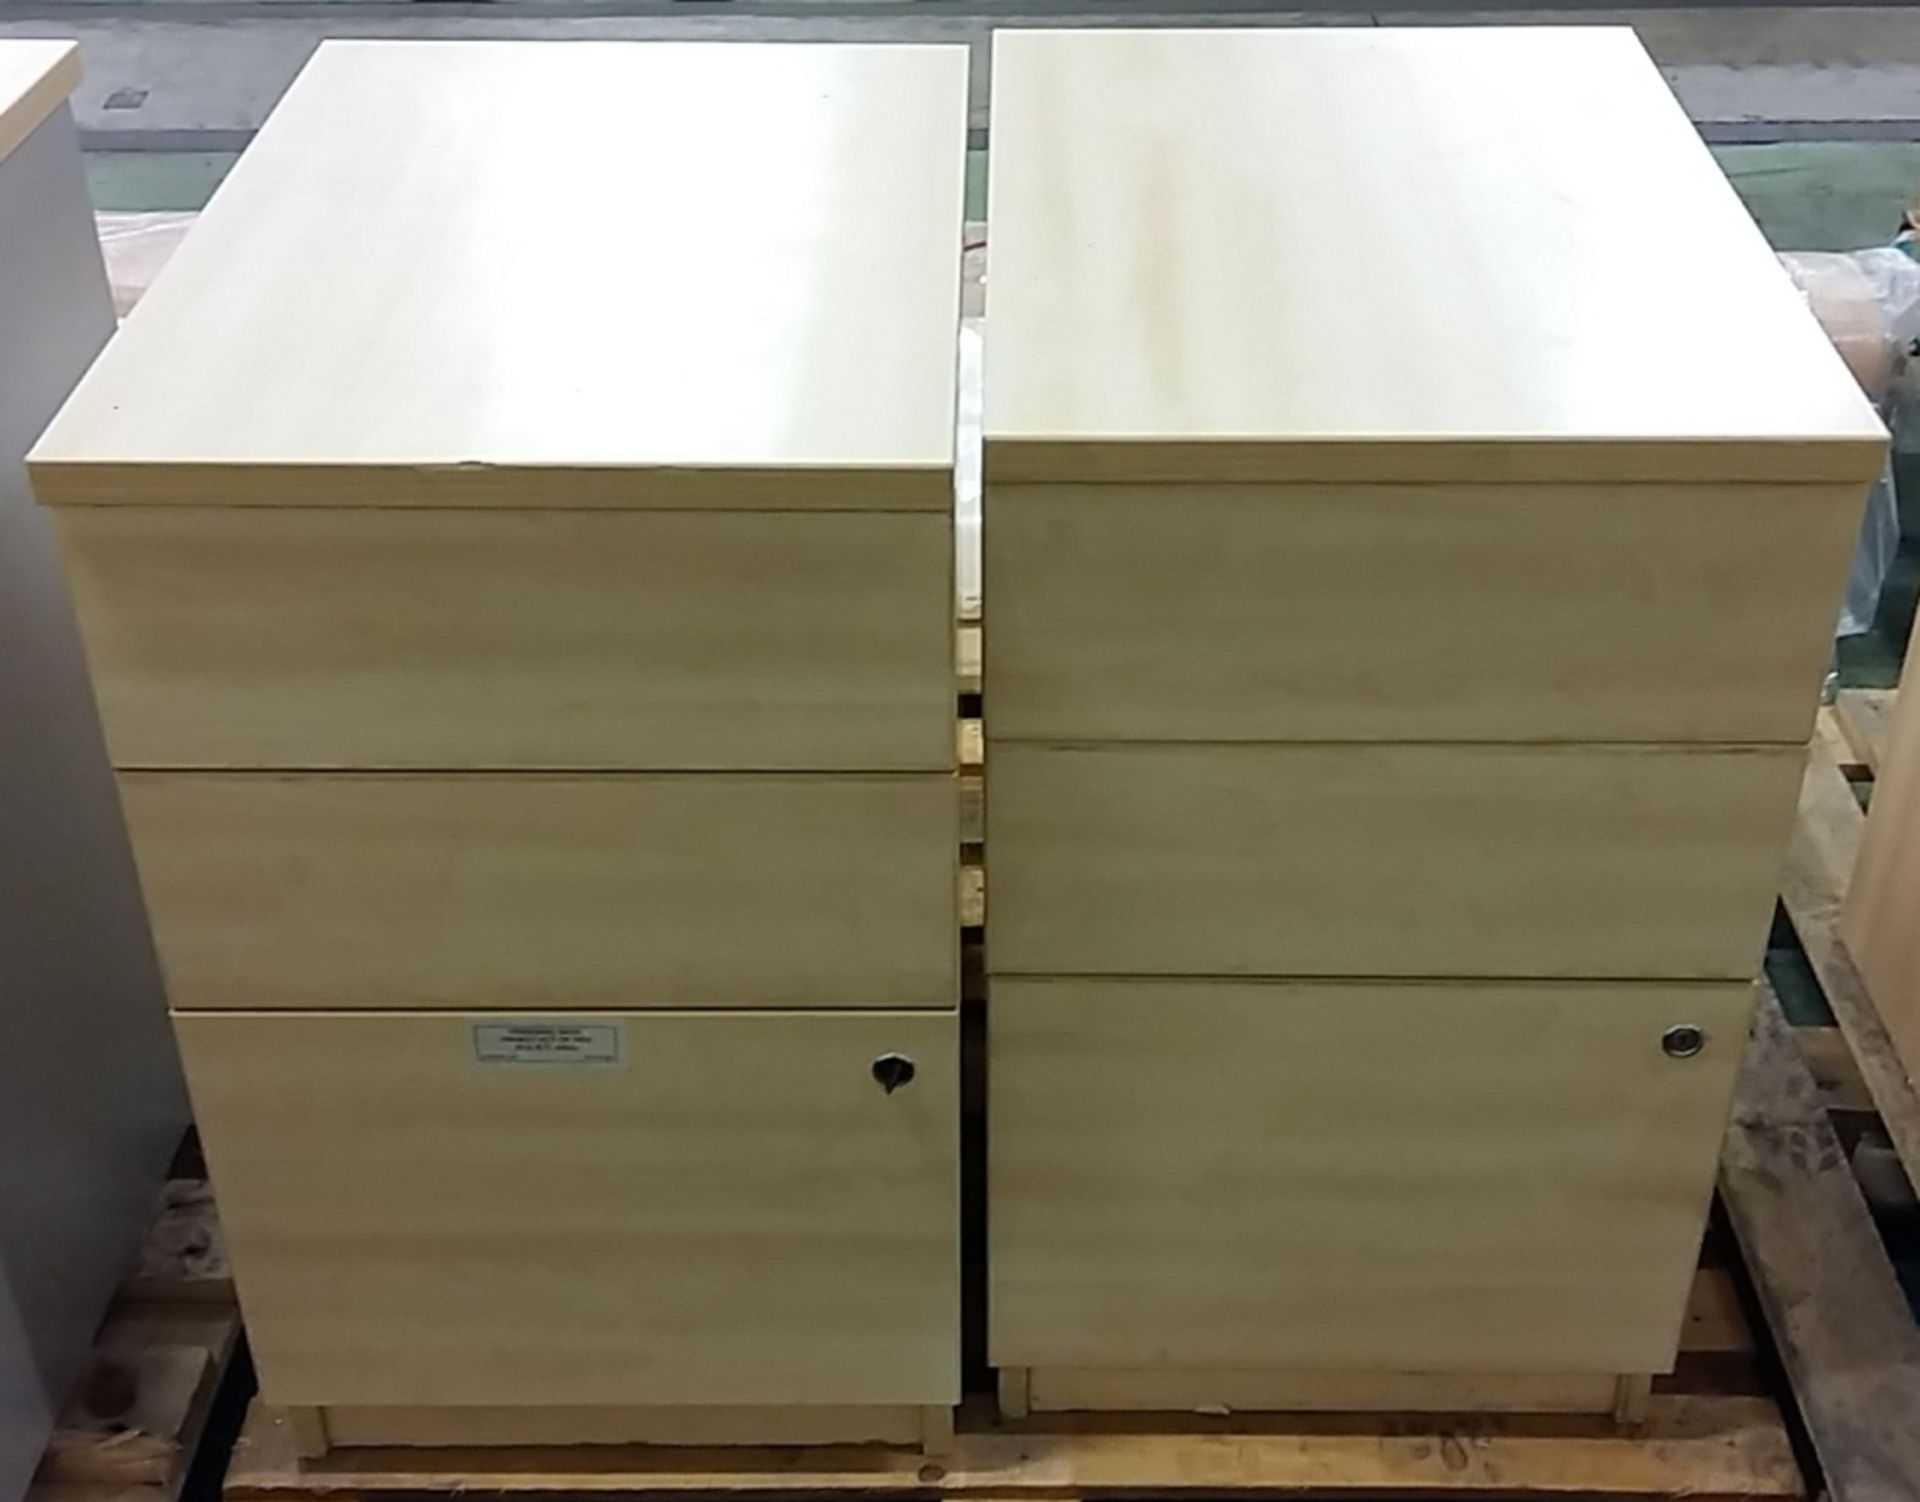 2x 3 drawer wooden cabinets